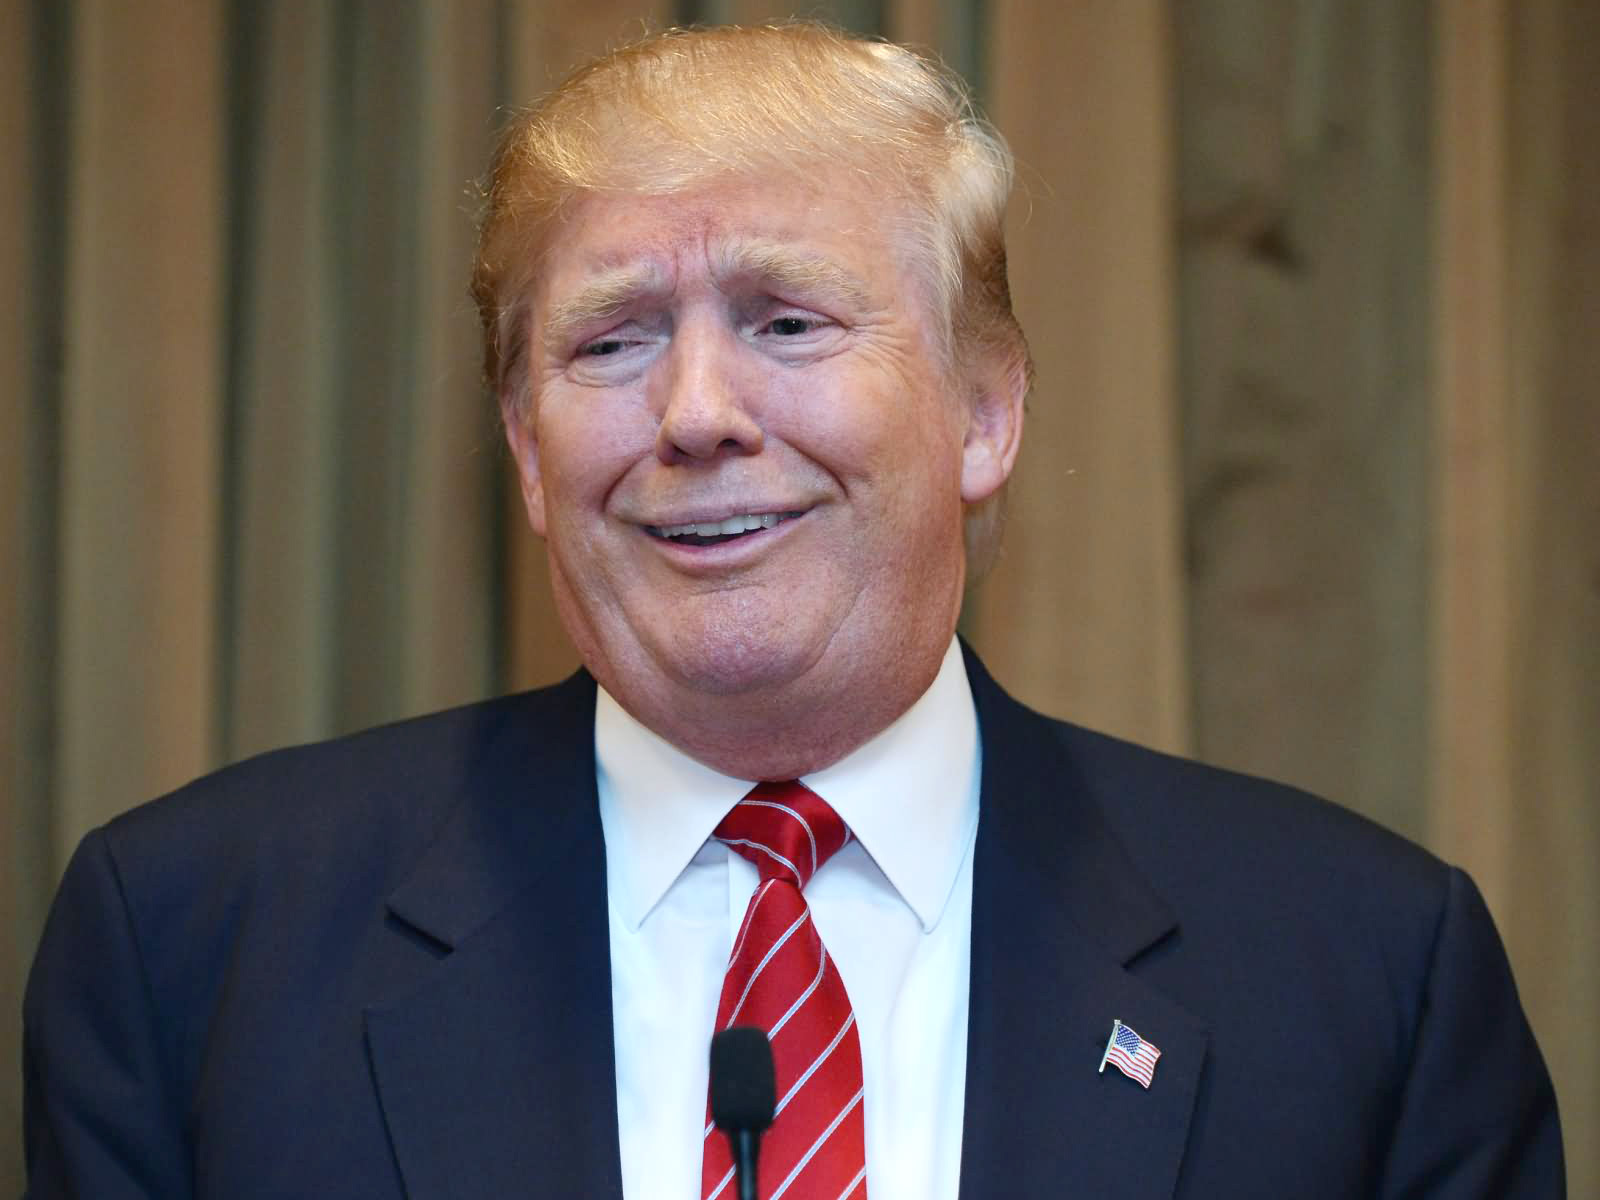 donald-trump-funny-smiling-picture